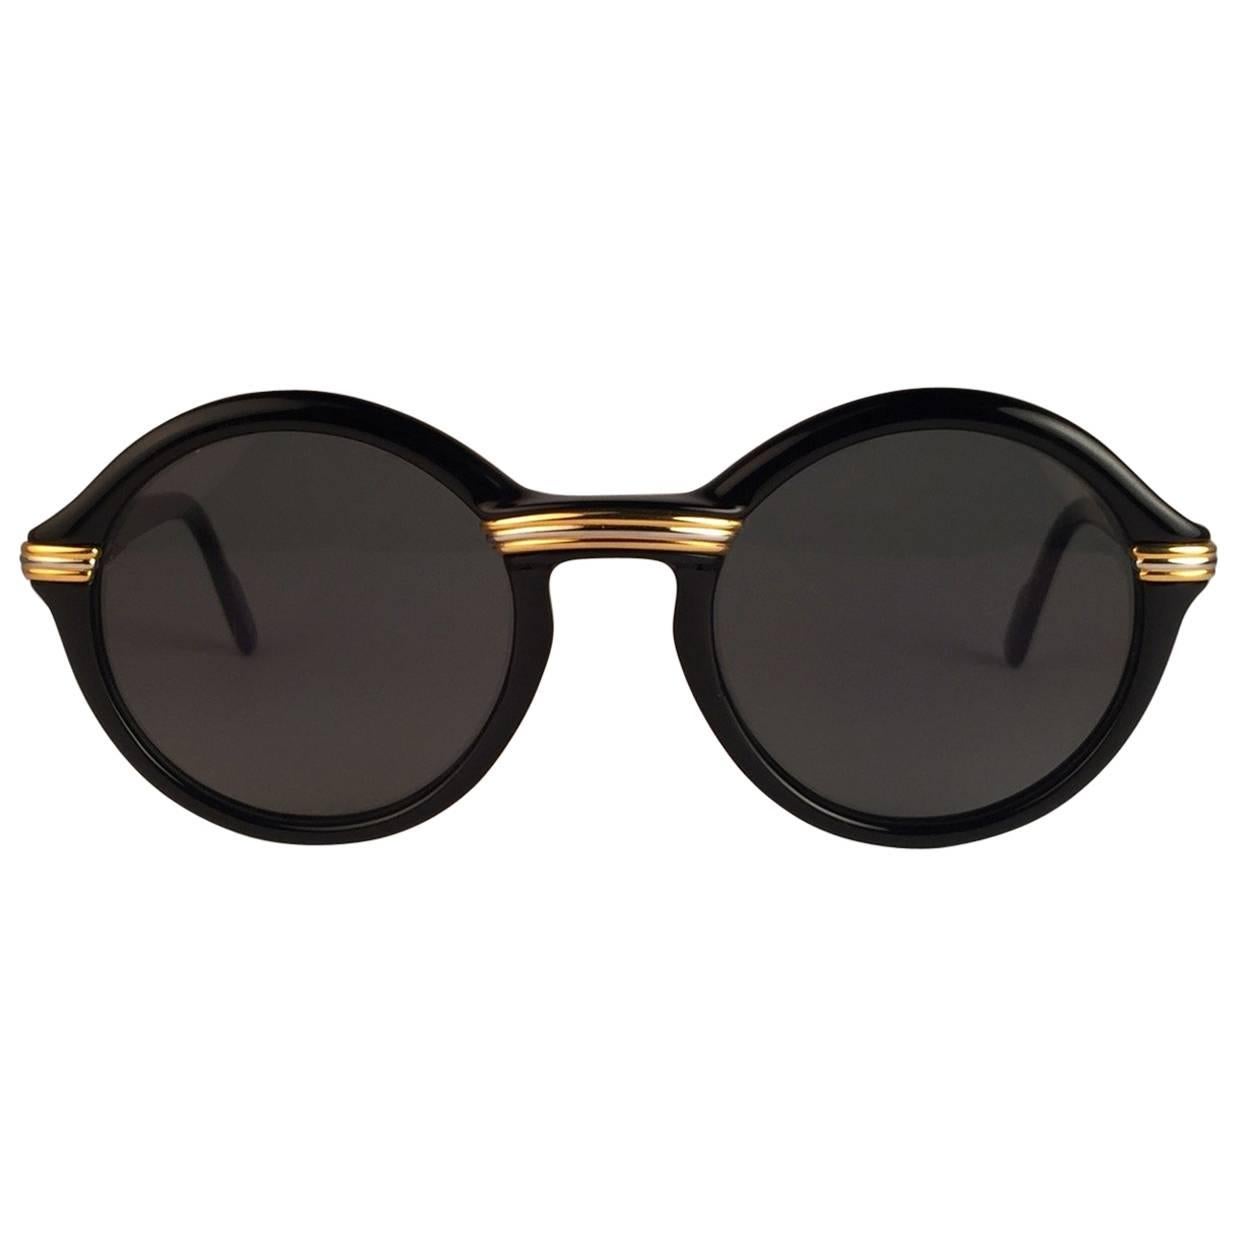 New 1991 Original Cartier Cabriolet Art Deco Black & Gold Sunglasses with gold ( uv protection ) lenses
Frame has the famous real gold and white gold accents in the middle and on the sides. 
All hallmarks. Cartier gold signs on the earpaddles. Both